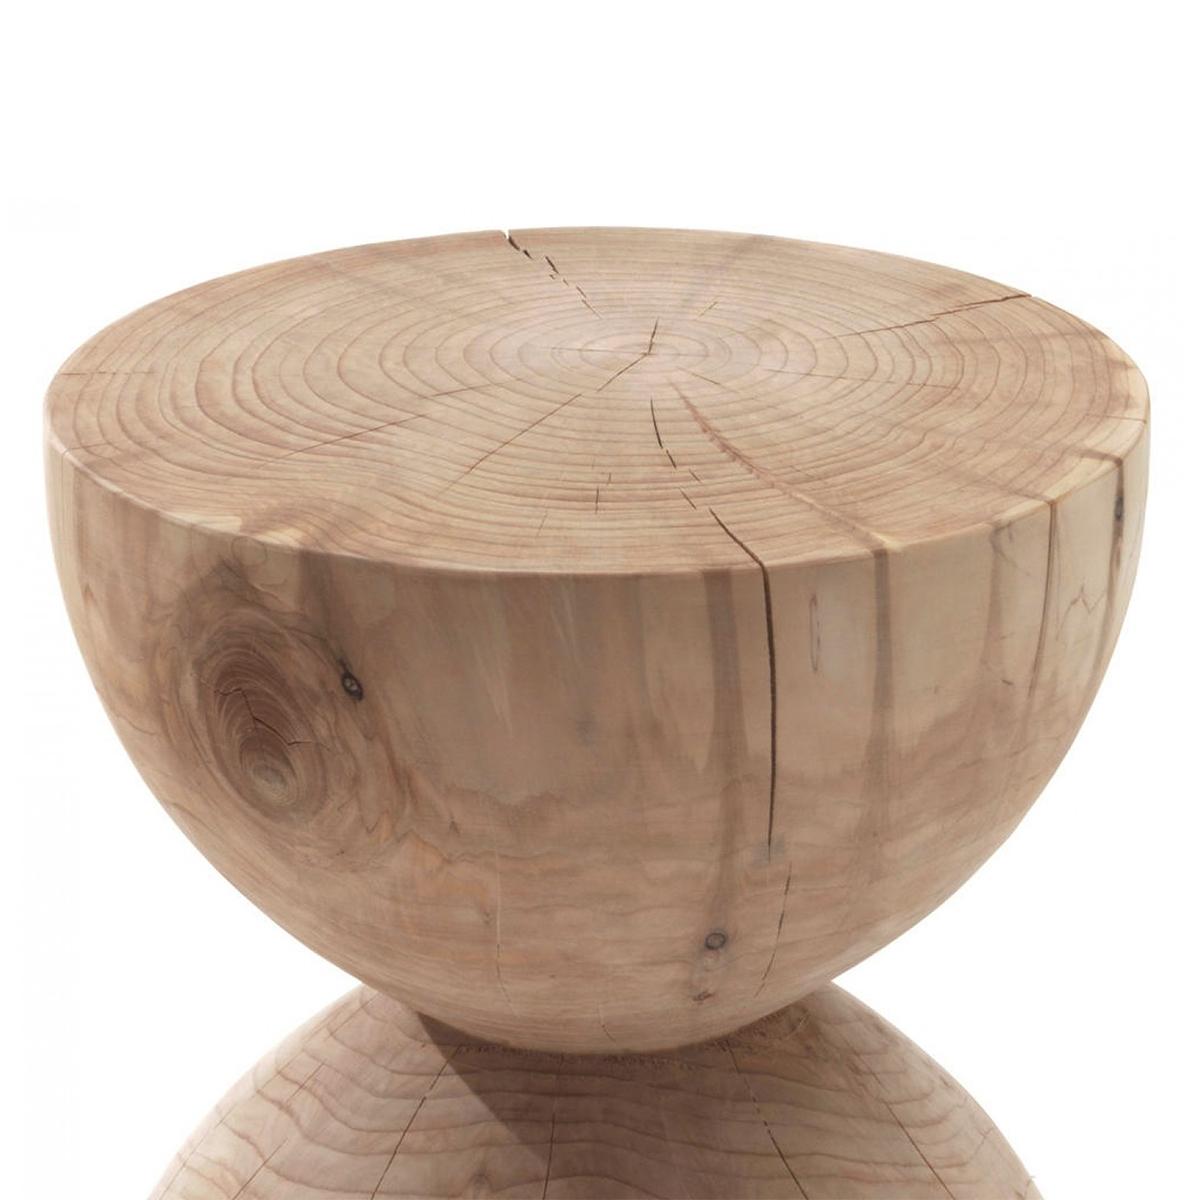 Stool spheres cedar in solid natural aromatic cedar wood in natural finish.
Made in on block of cedar wood. Sinuous and wavy movement. Elegant
and original piece. Solid cedar wood include movement, cracks and changes
in wood conditions, this is